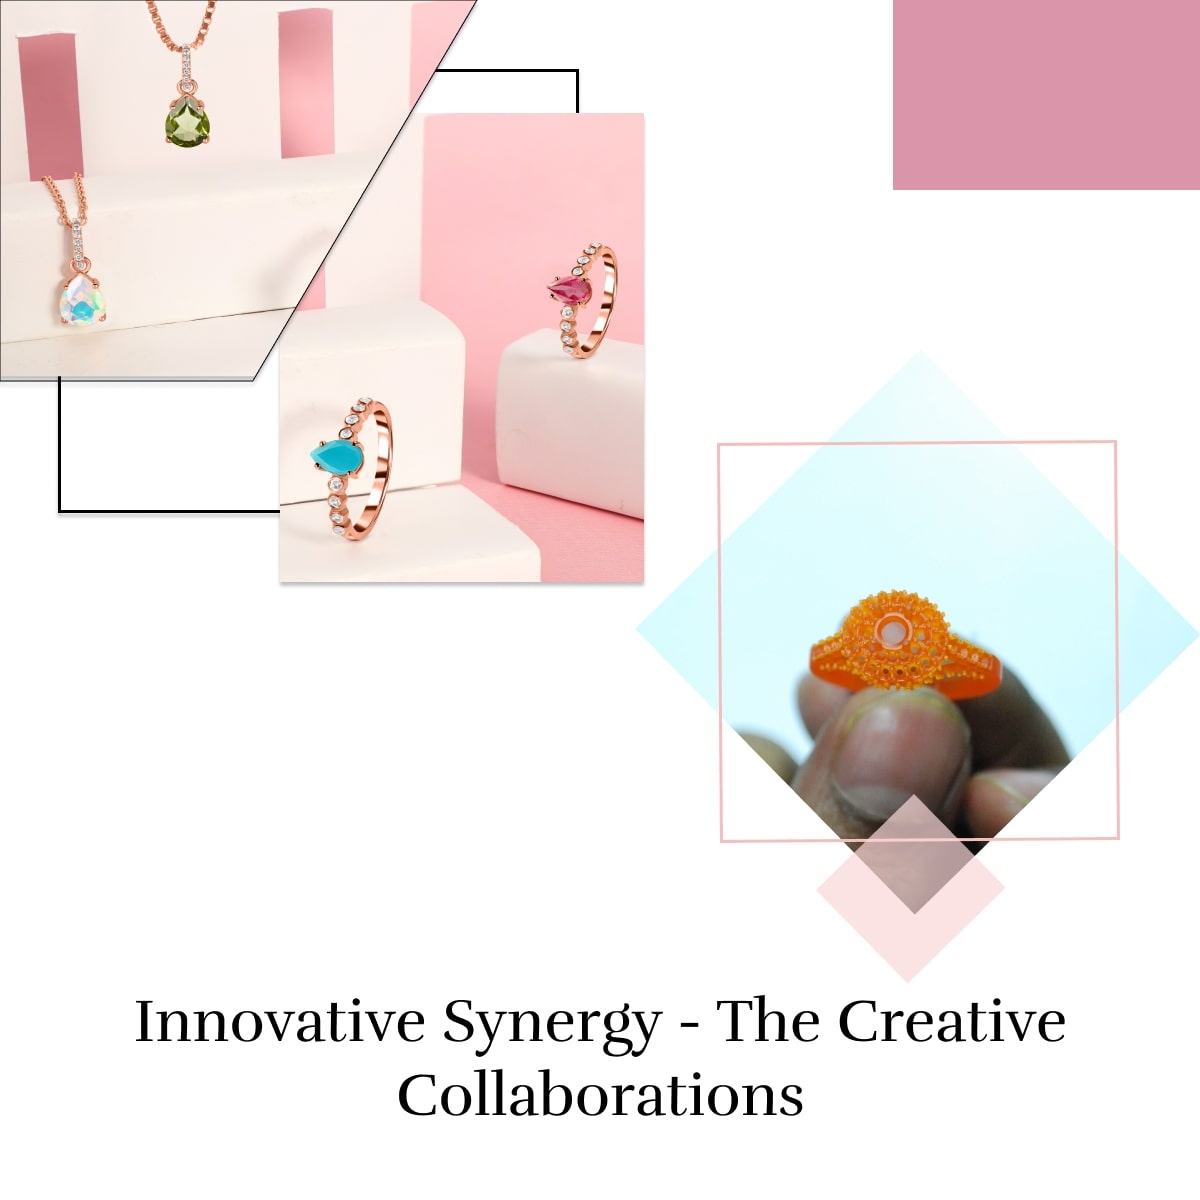 The Creative Collaborations